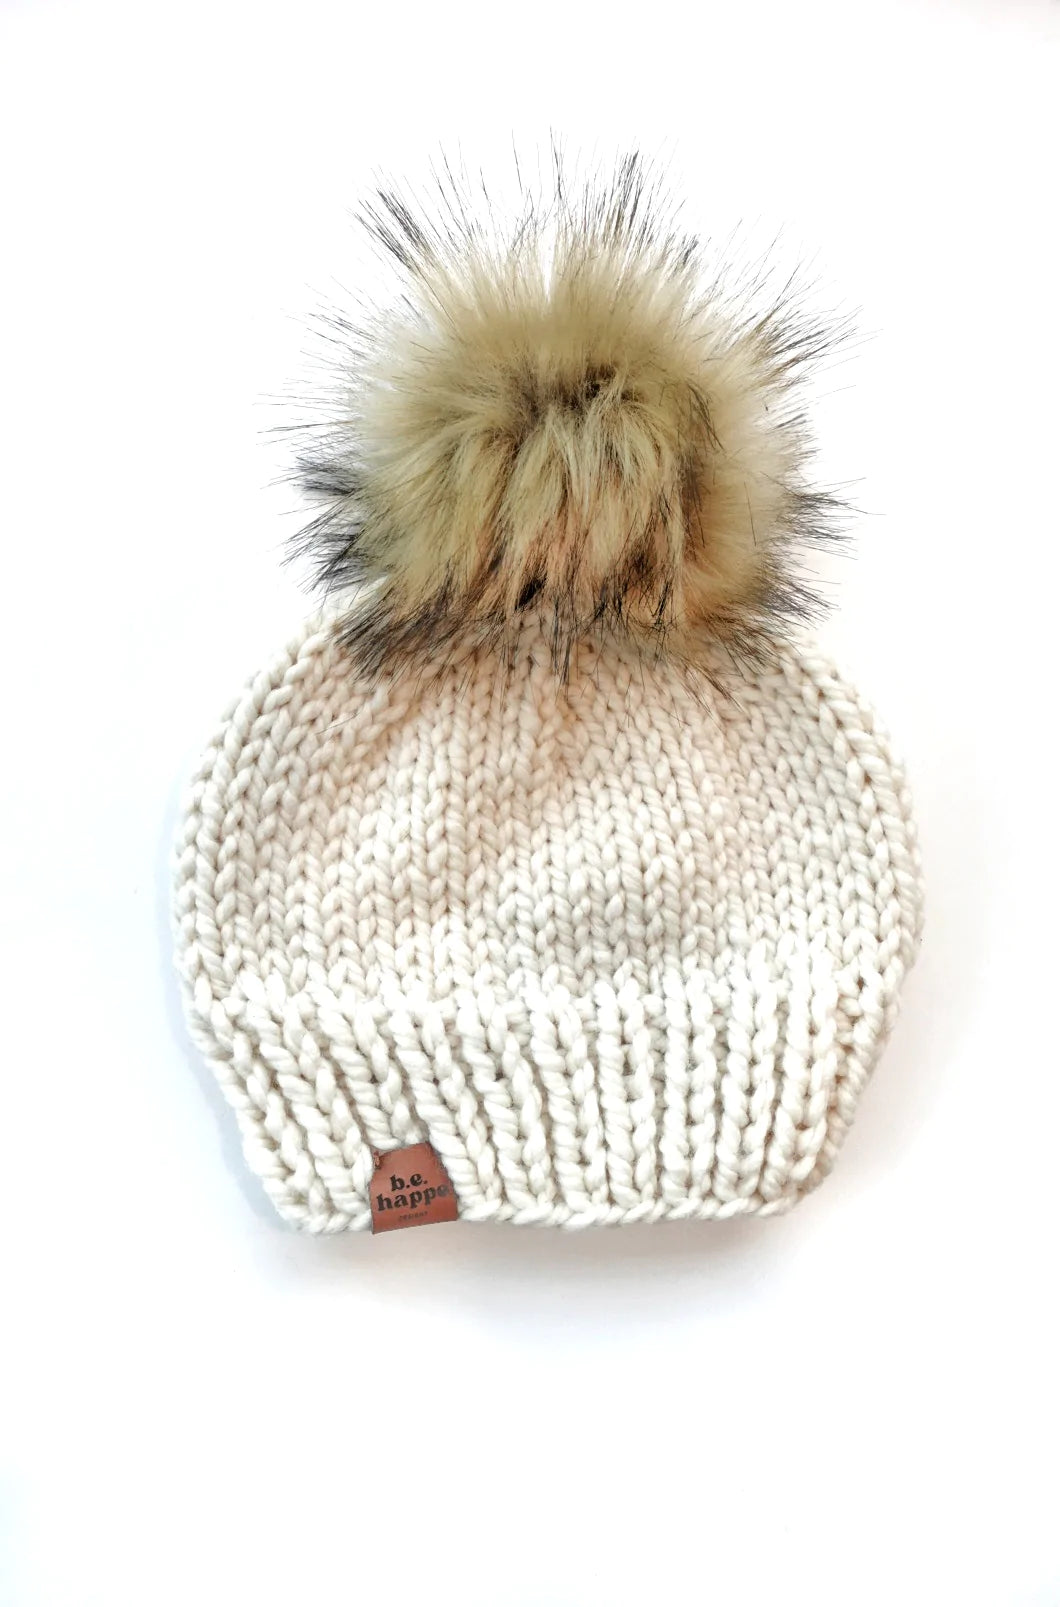 B.E. Happe Solid Knit Hat - Off White